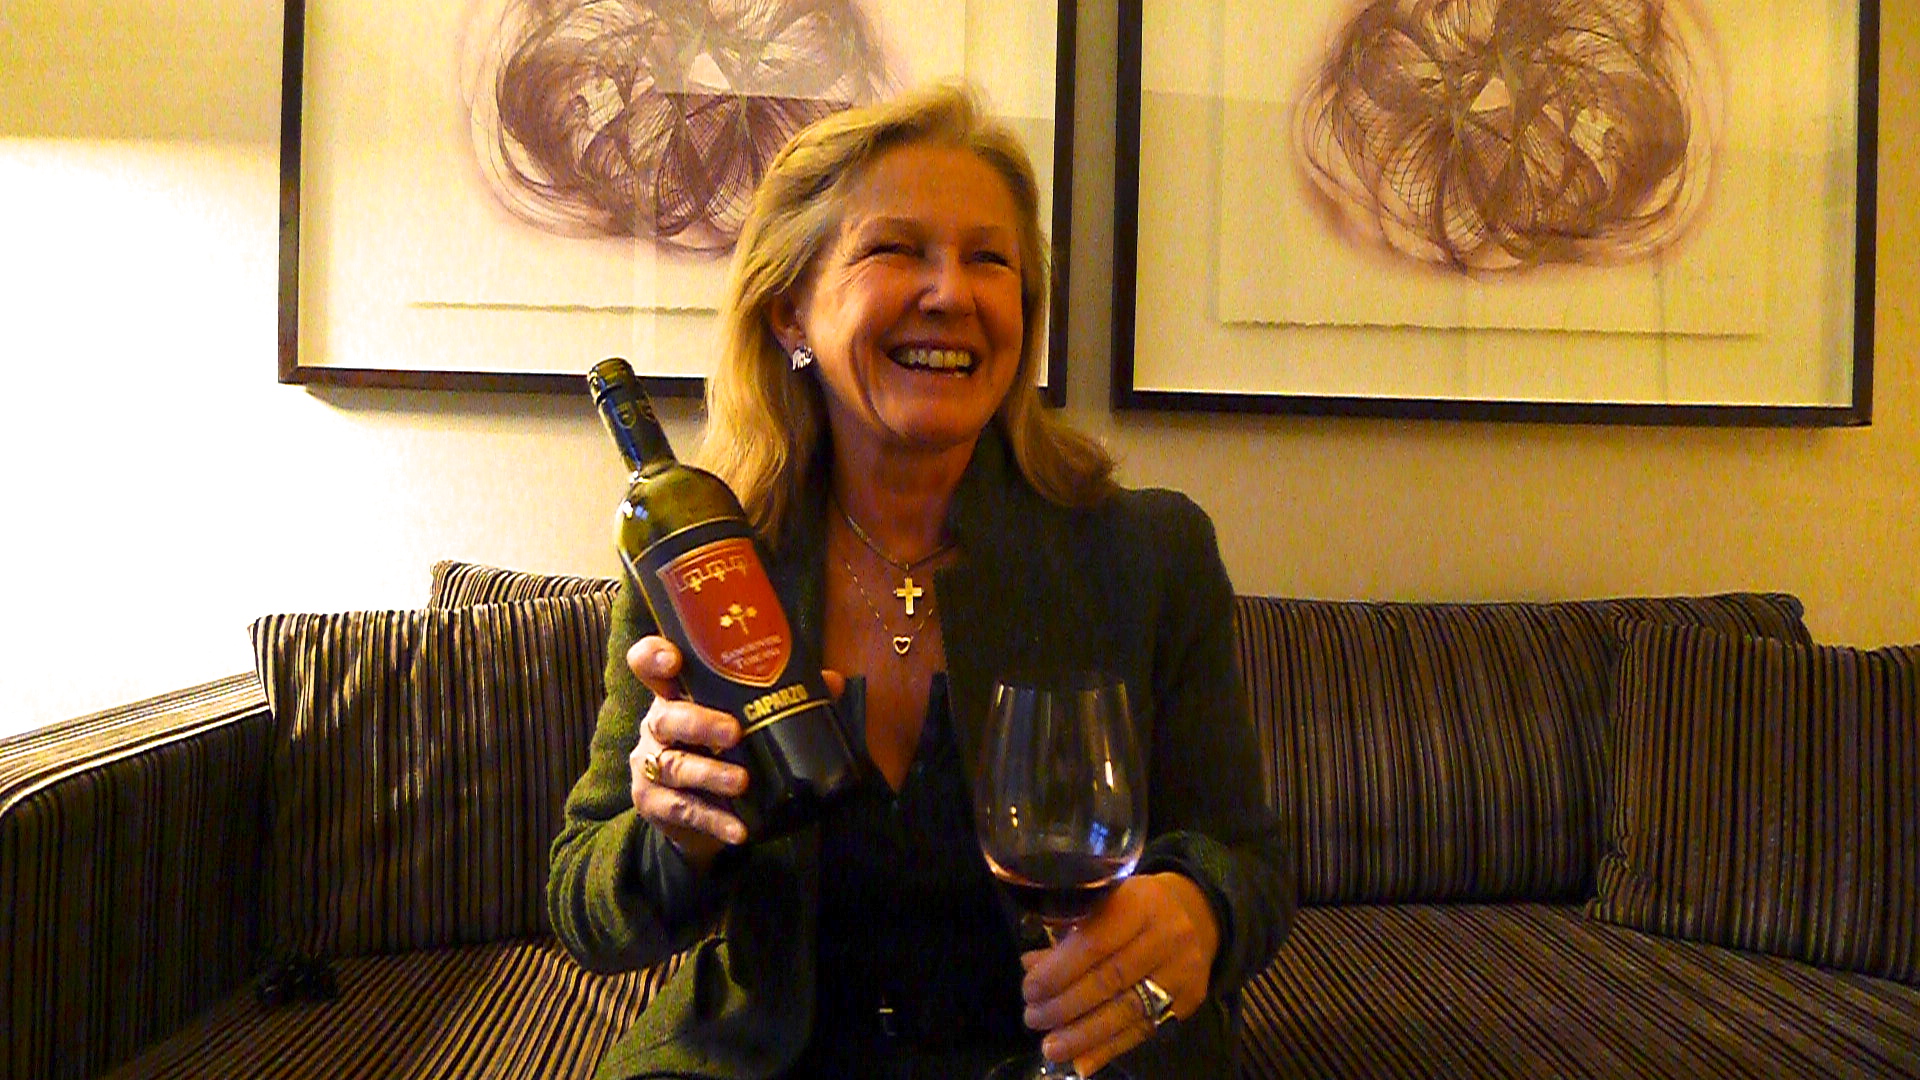 In Toronto this week for the launch of her new wine, Elisabetta Gnudi Angelini certainly loves what she does.